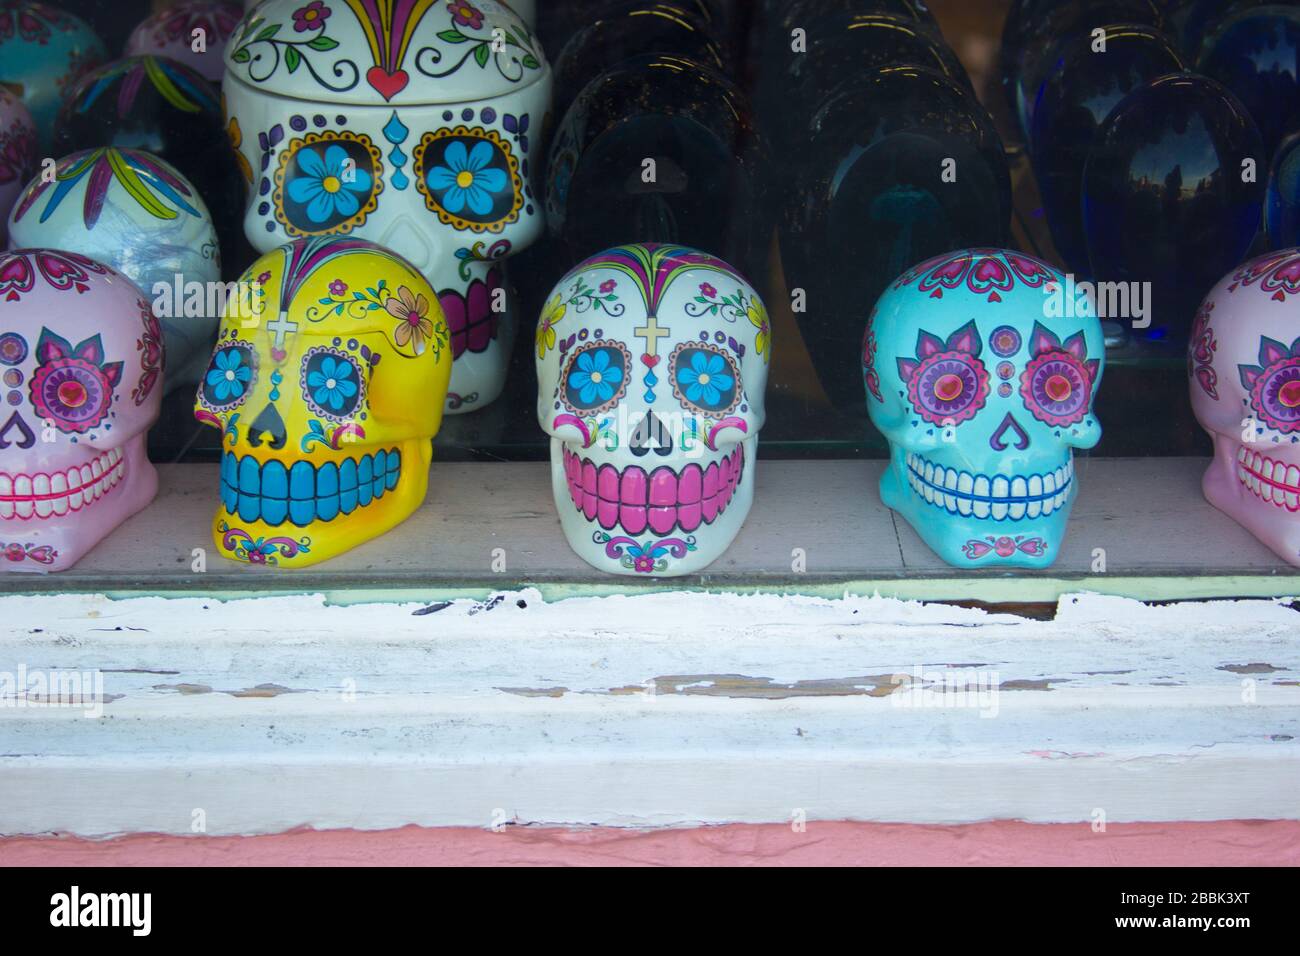 A row of colorful sugar skulls for sale in a store window Stock Photo